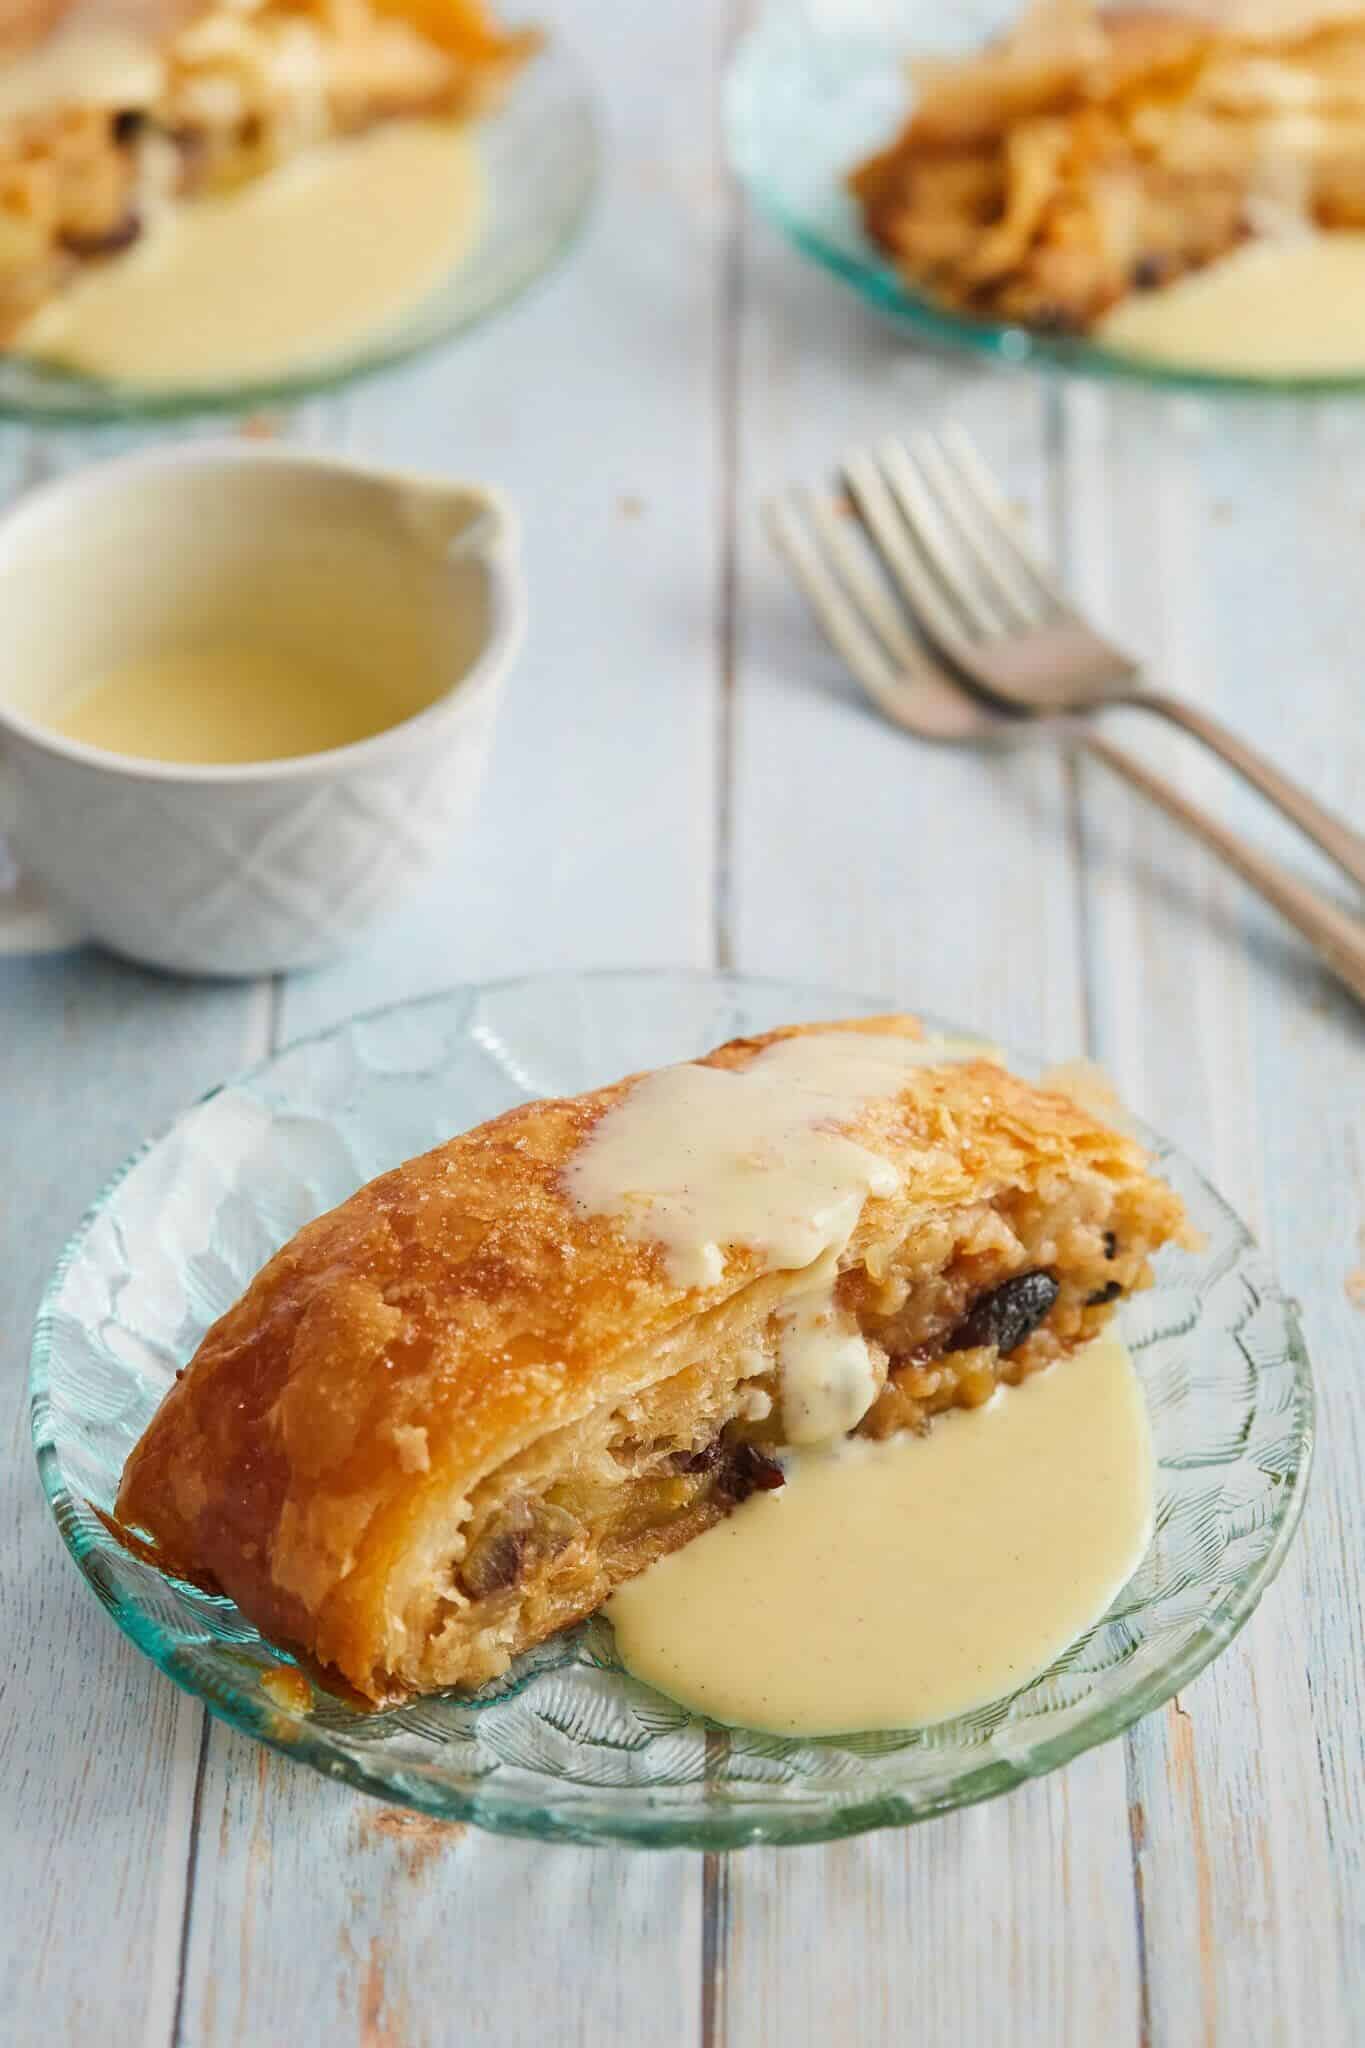 Apple Strudel is served on a glass plate covered in Creme Anglaise. The tender apples, aromatic cinnamon sugar are wrapped with layers of flaky pastry . More slices and Creme Anglaise are served on the side with two forks.